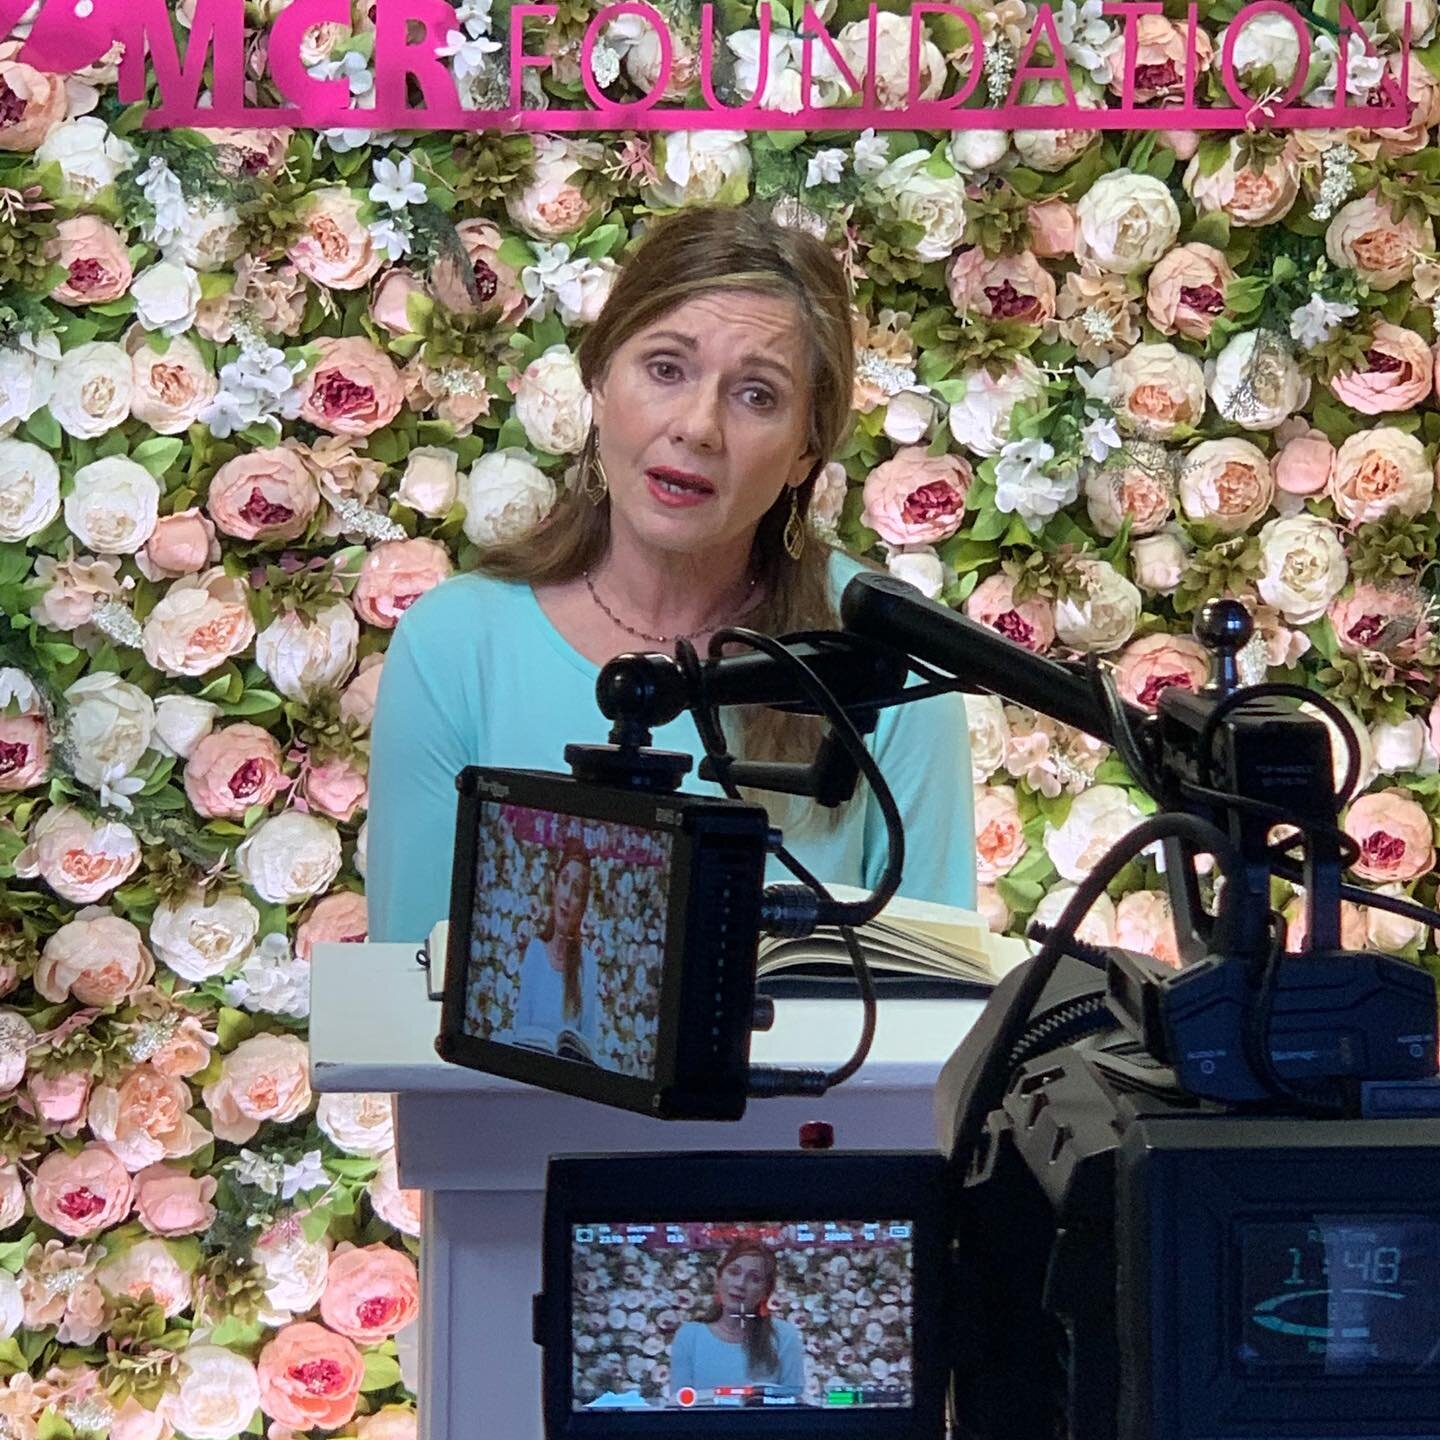 Lights-camera-action !! We are so excited to have our flower wall as part of Mommy, doll, and me for tea this year. Contract us if you need a beautiful flower wall for a background or for a photo shoot 📸 🎥🌸🌺